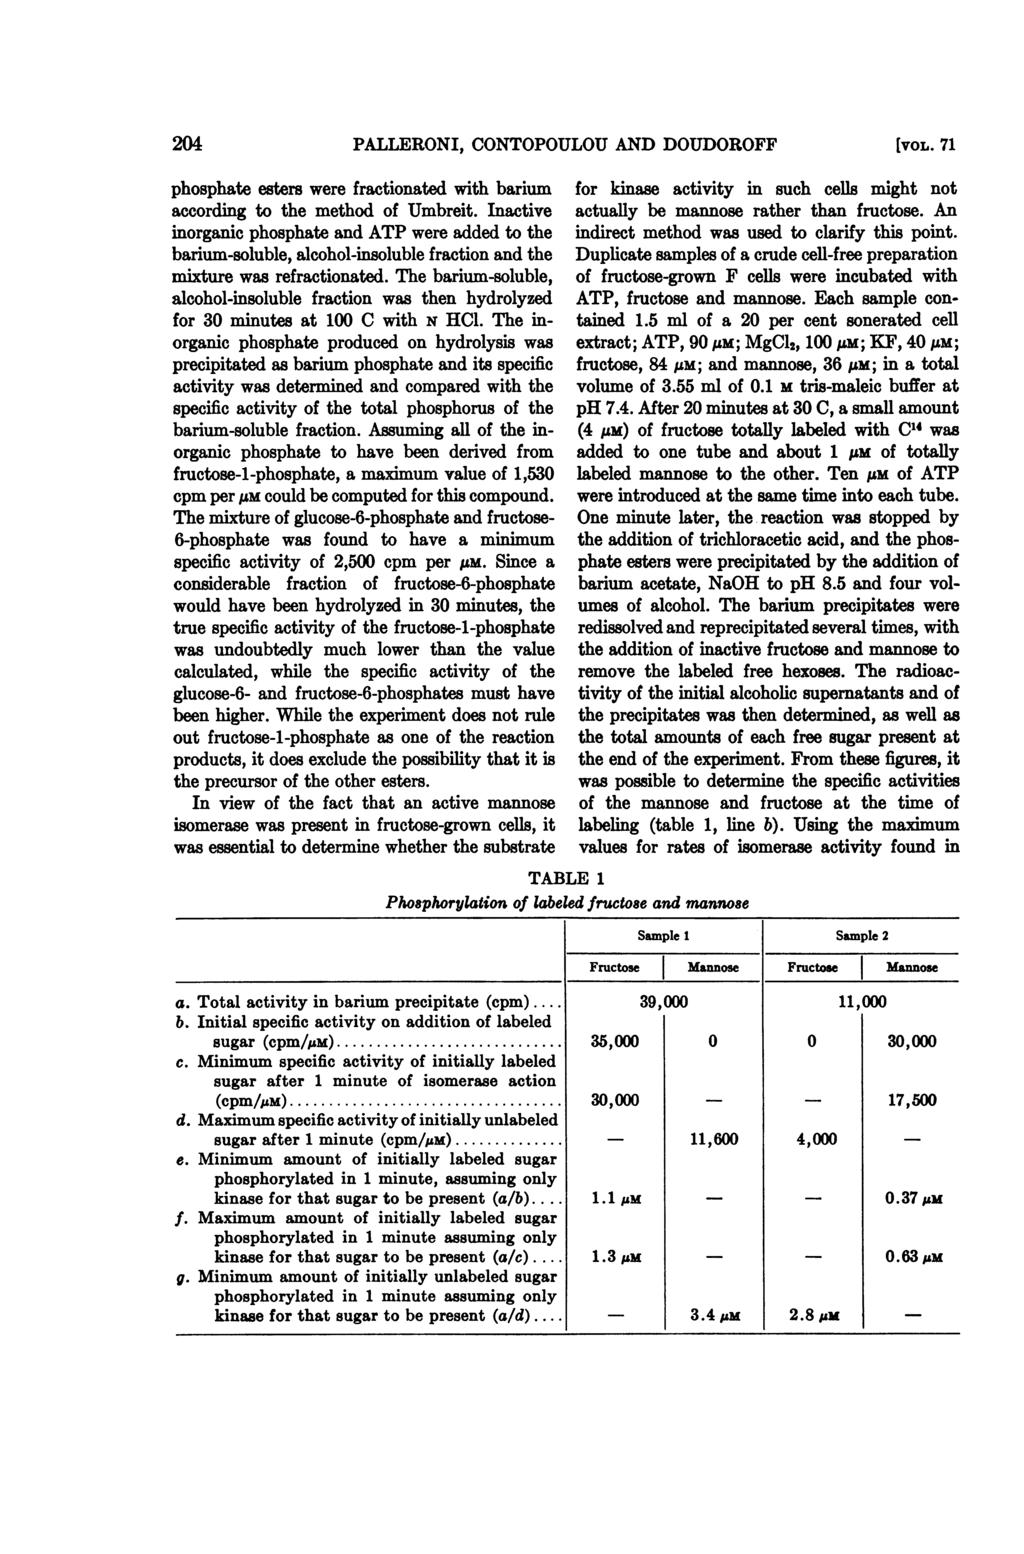 204A PALLERONI, CONTOPOULOU AND DOUDOROFF [vol. 71 phosphate esters were fractionated with barium according to the method of Umbreit.